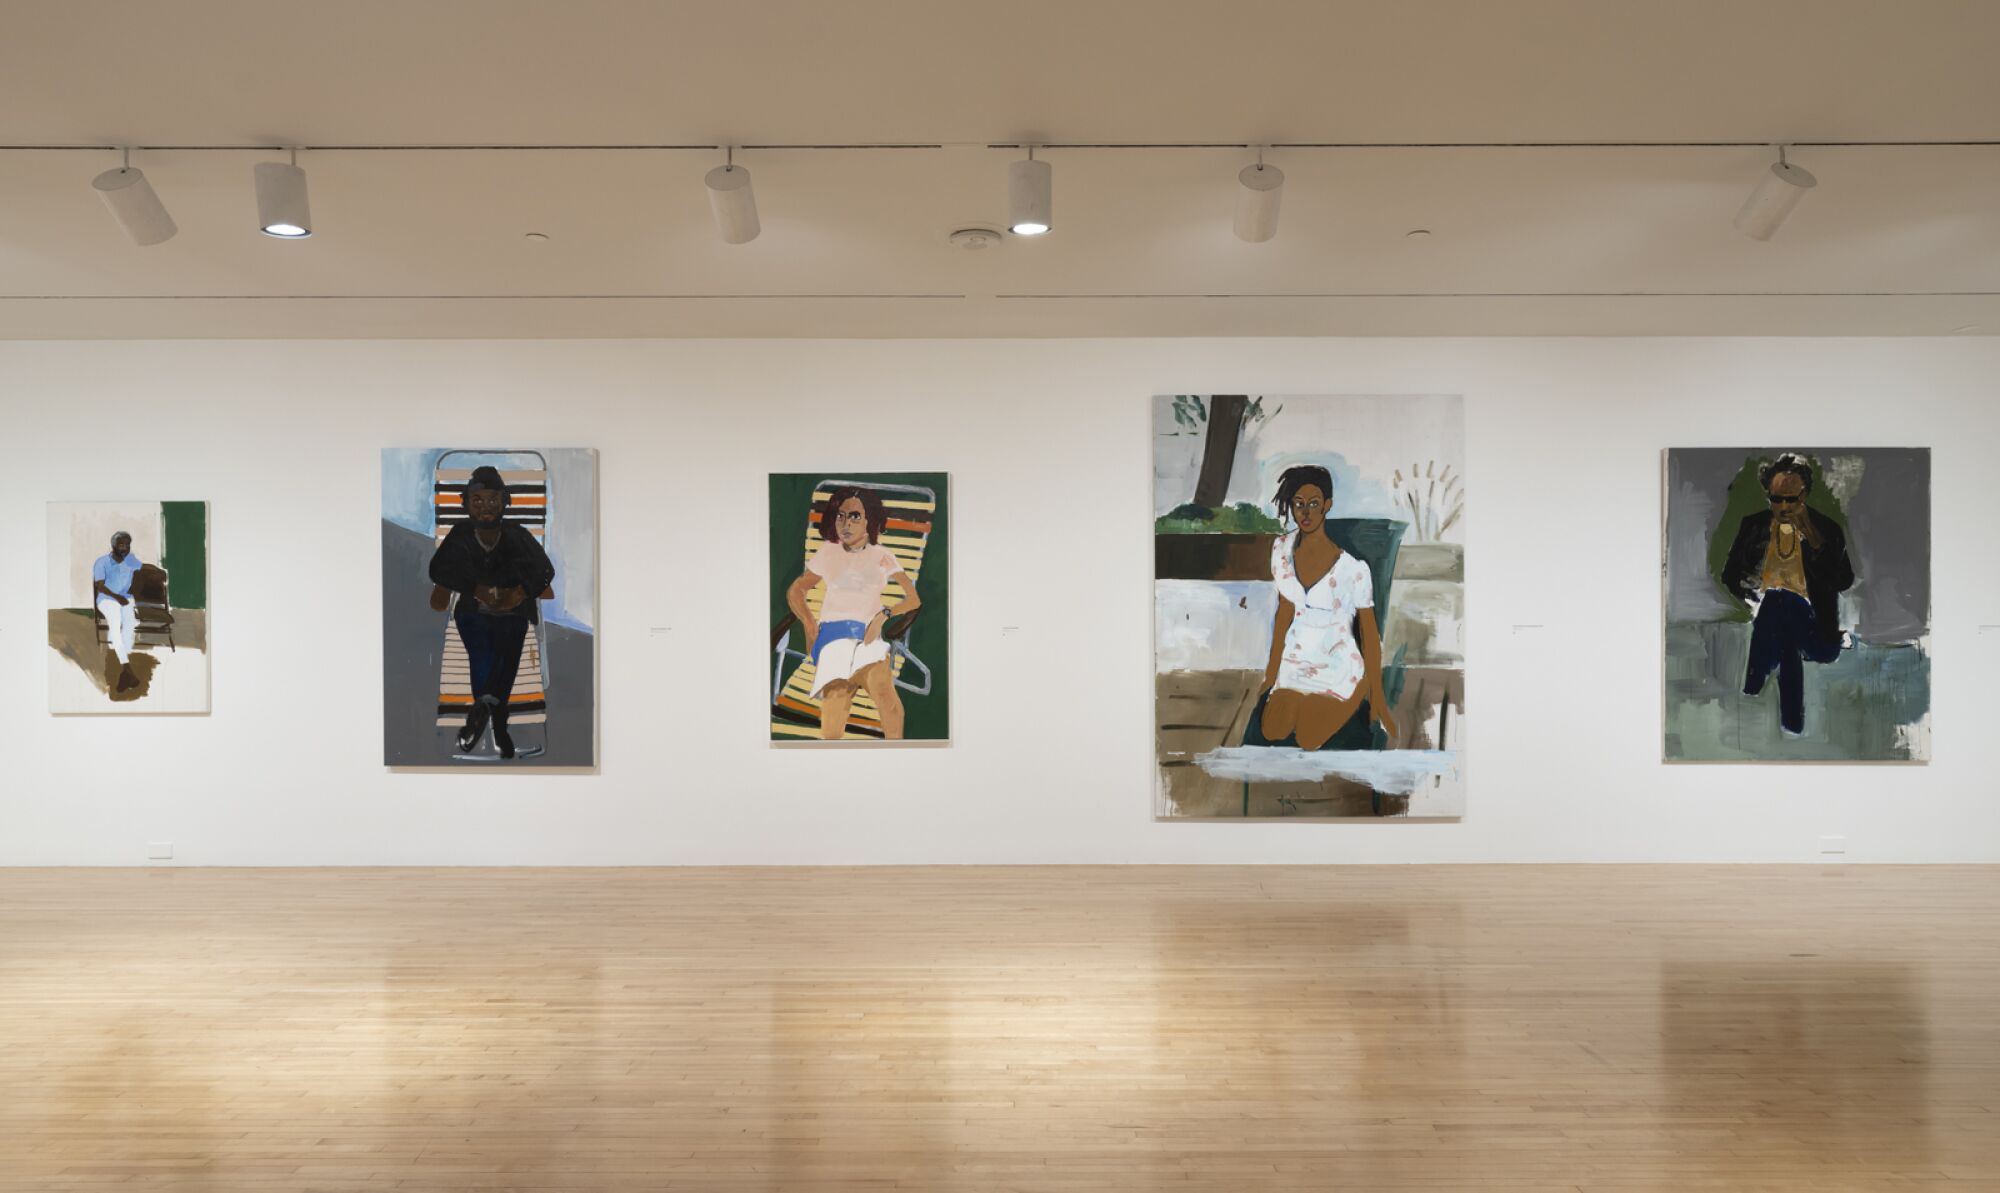 A gallery features five portraits of different sizes and scales, the largest a portrait of photographer Deana Lawson